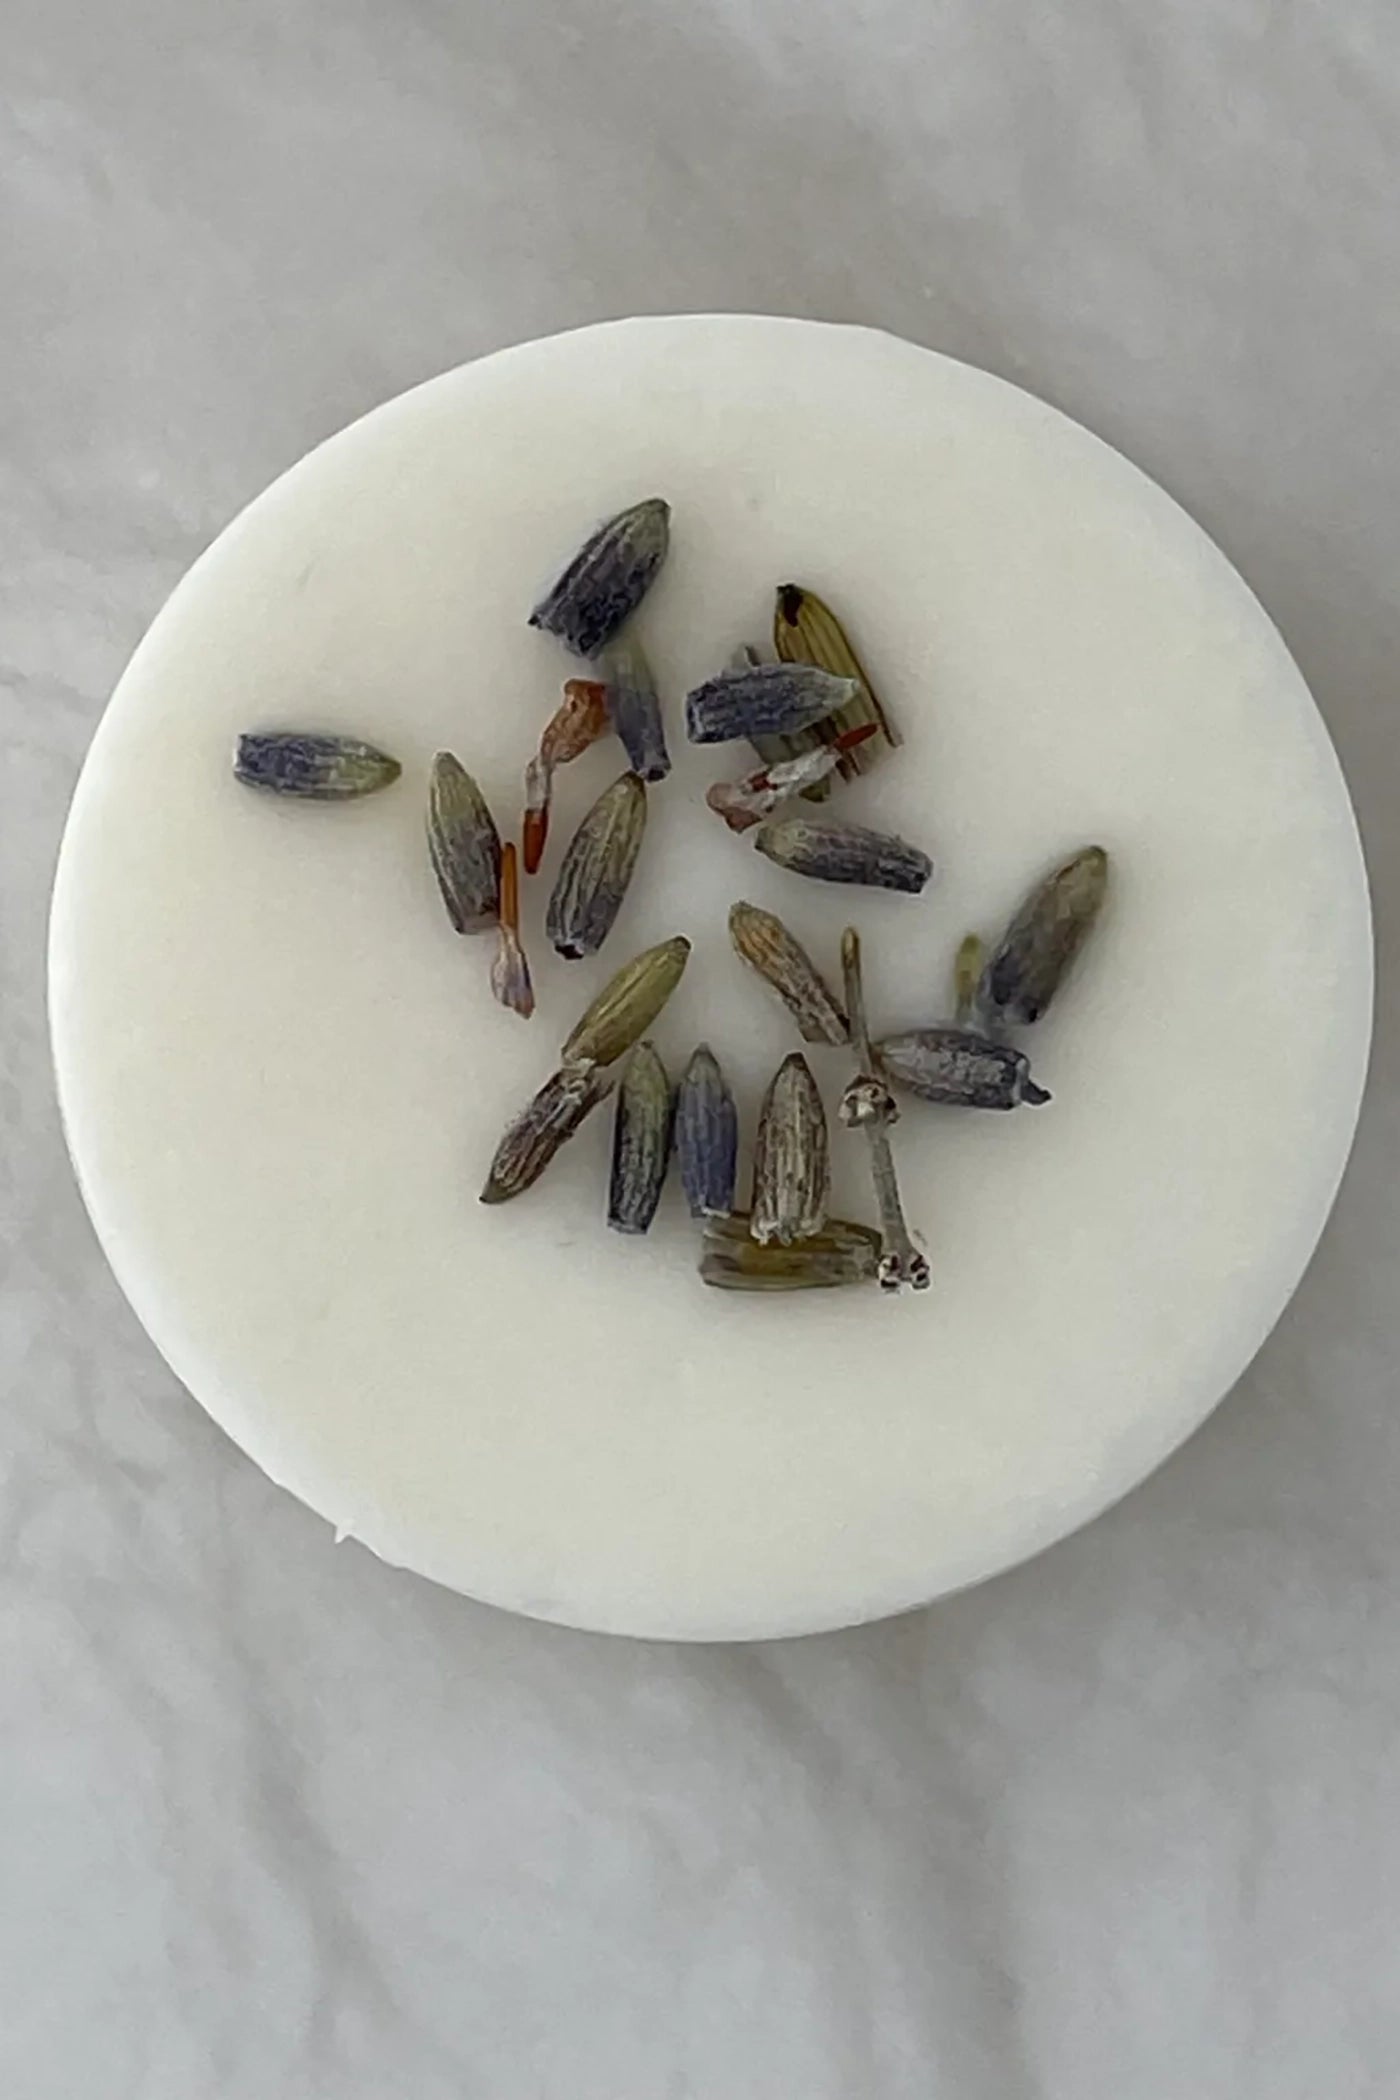 A single white wax melt with pieces from the scent profile in the wax.